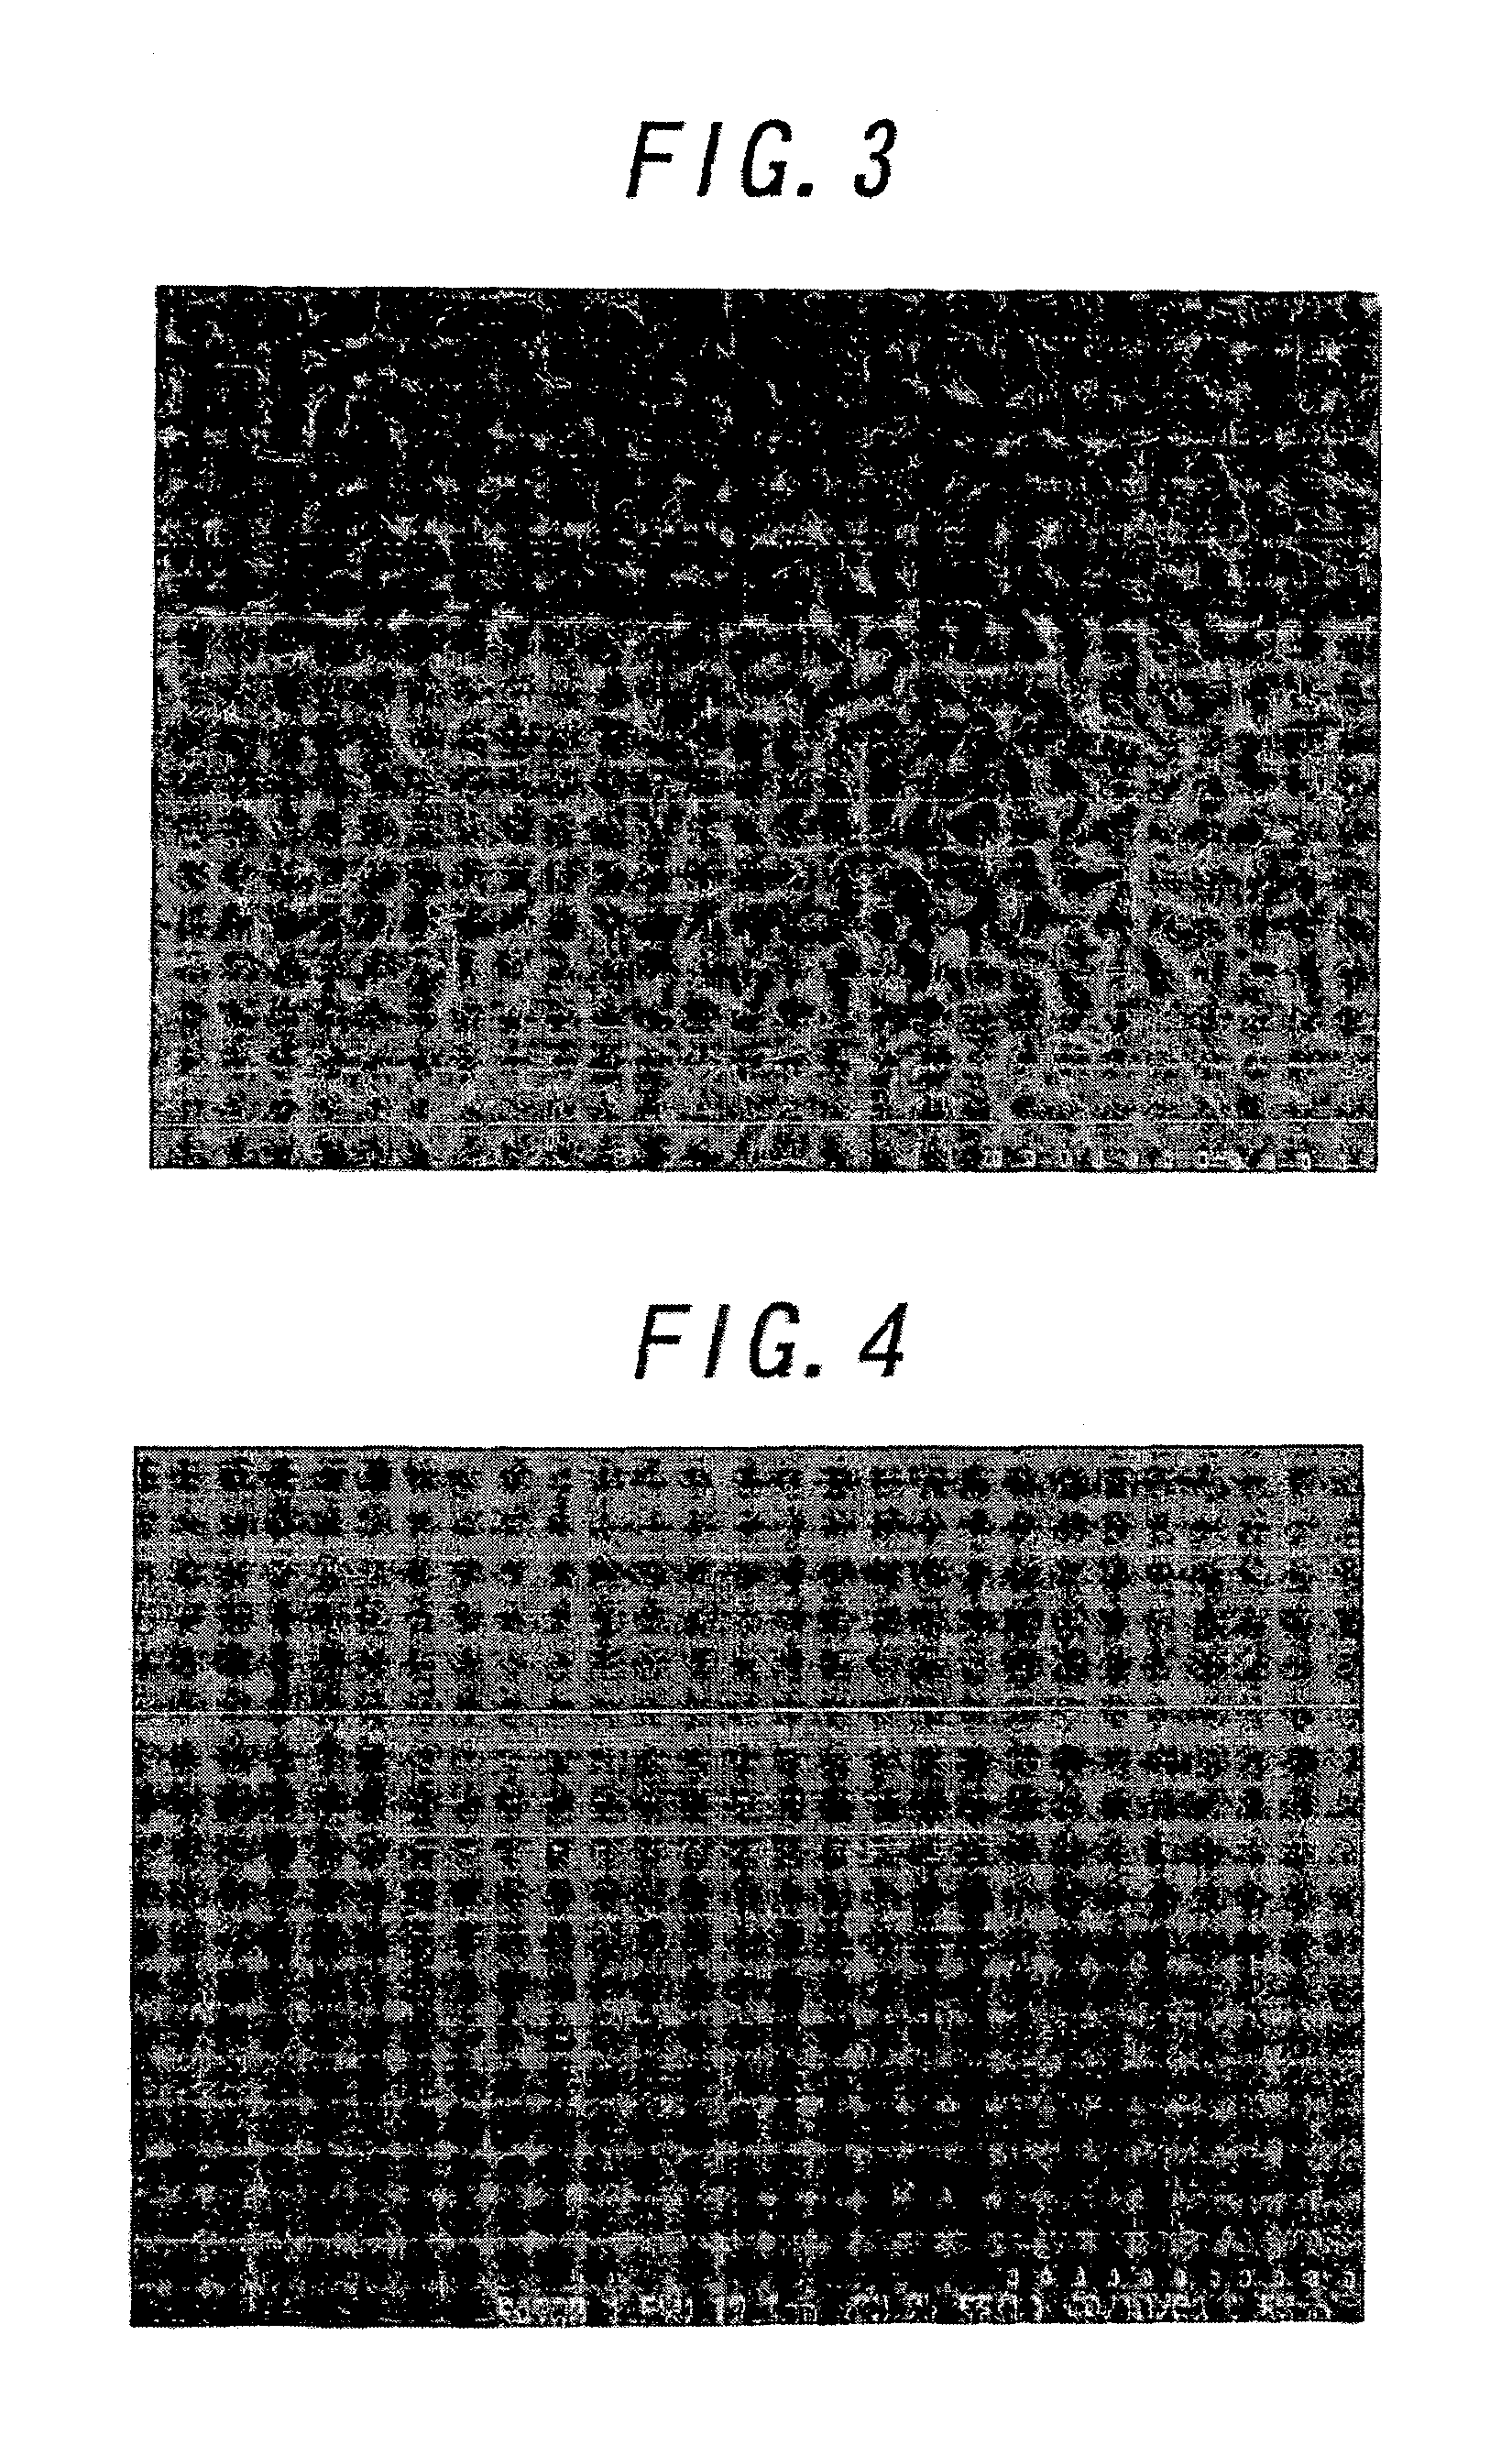 Method for fabricating a III nitride film, an underlayer for fabricating a III nitride film and a method for fabricating the same underlayer